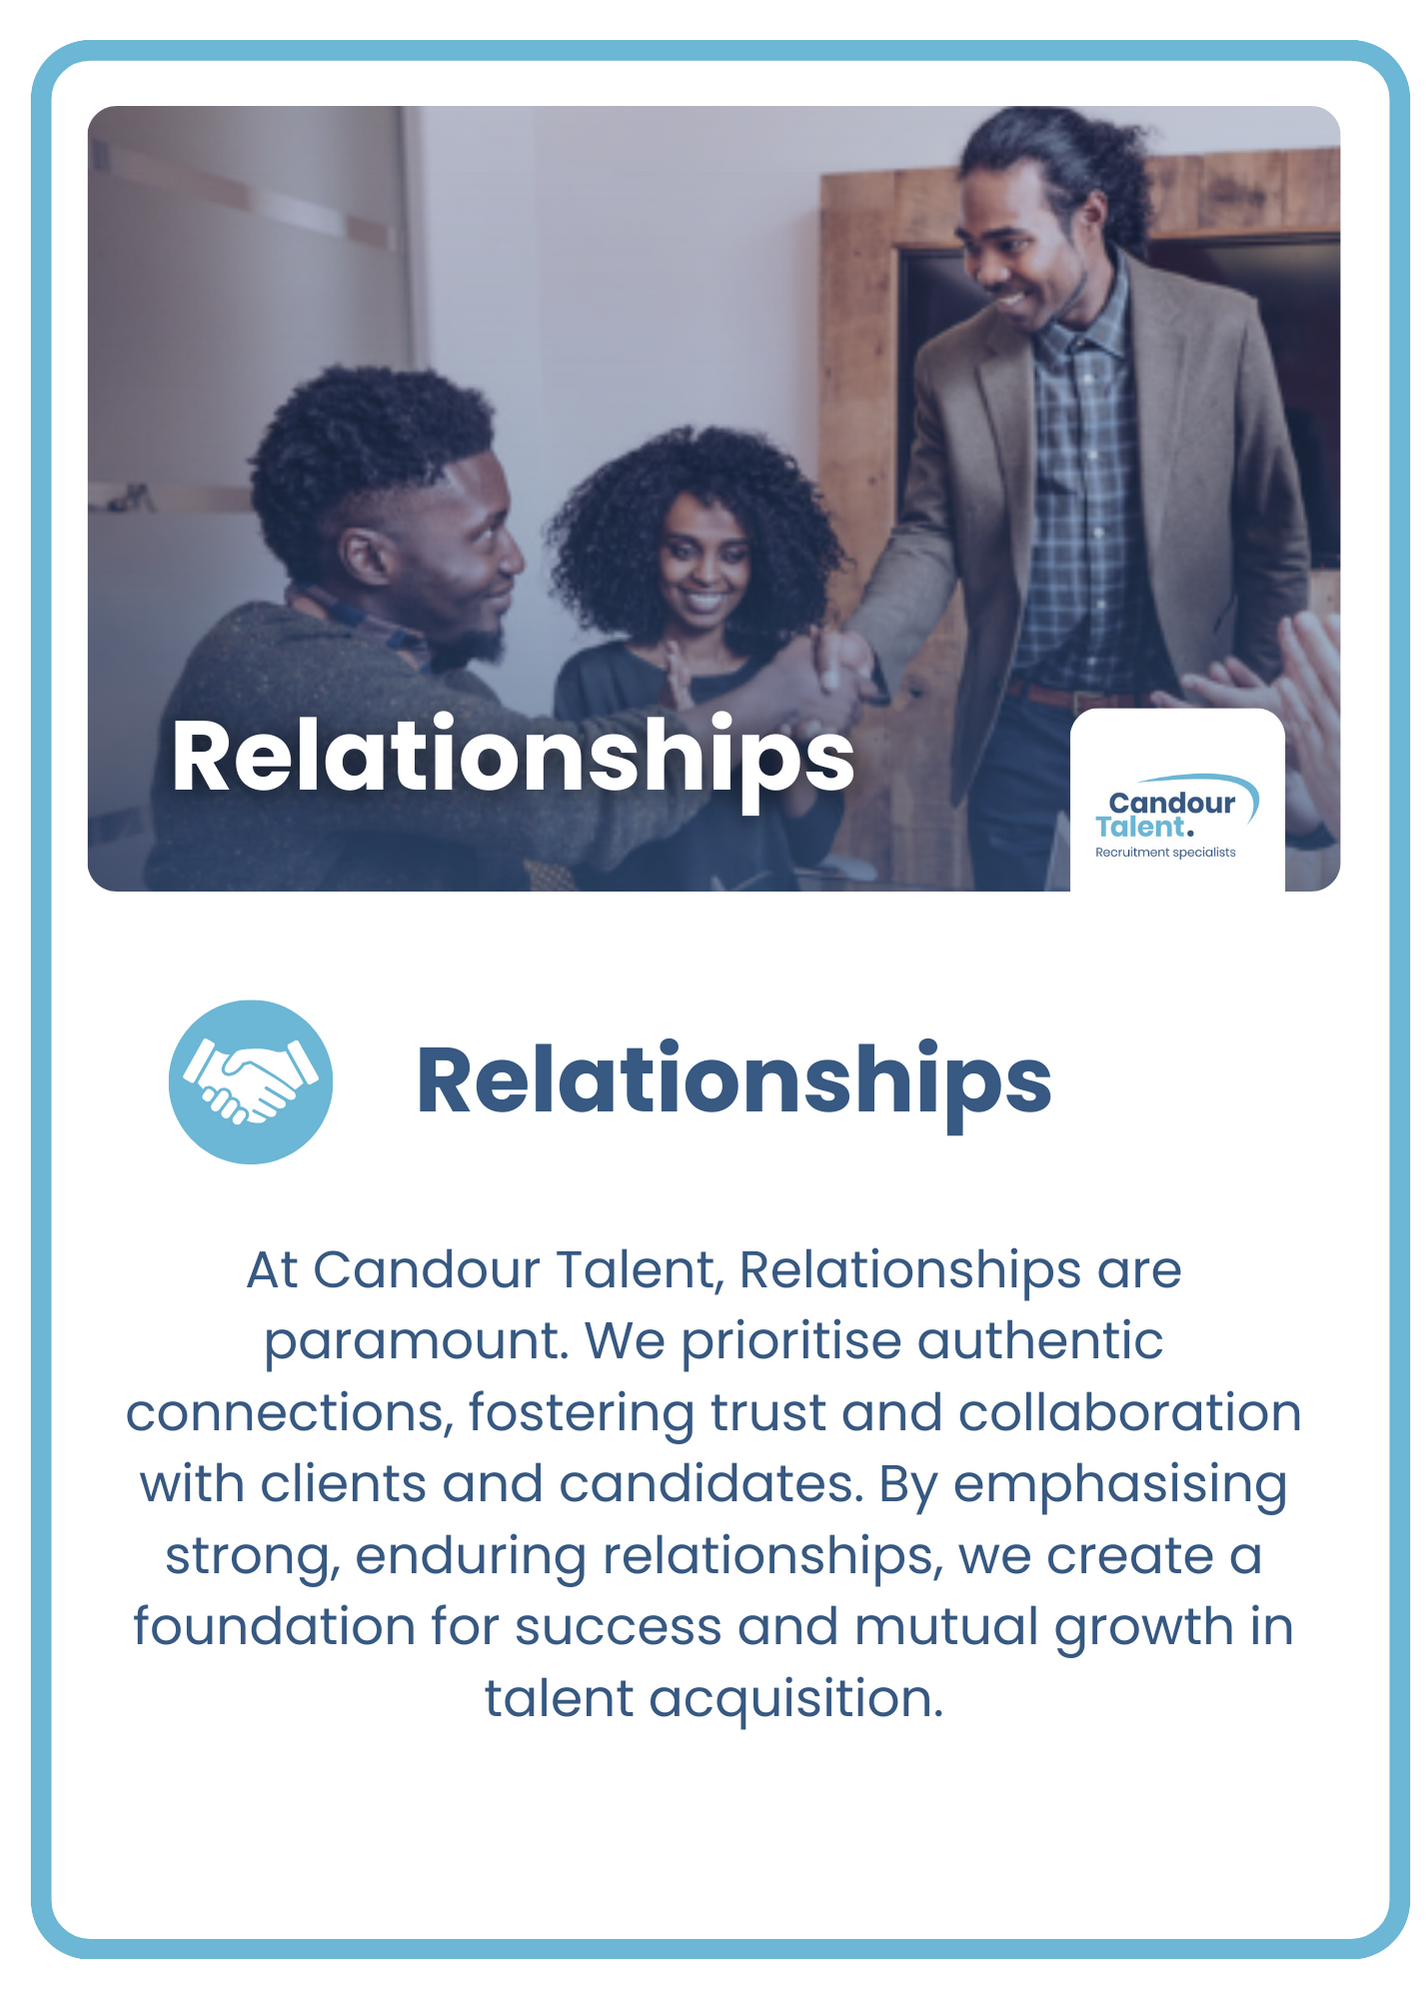 Candour Talent Recruitment Agency - Our Values page - our values of Relationships. Text: At Candour Talent, Relationships are paramount. We prioritise authentic connections, fostering trust and collaboration with clients and candidates. By emphasizing strong, enduring relationships, we create a foundation for success and mutual growth in talent acquisition